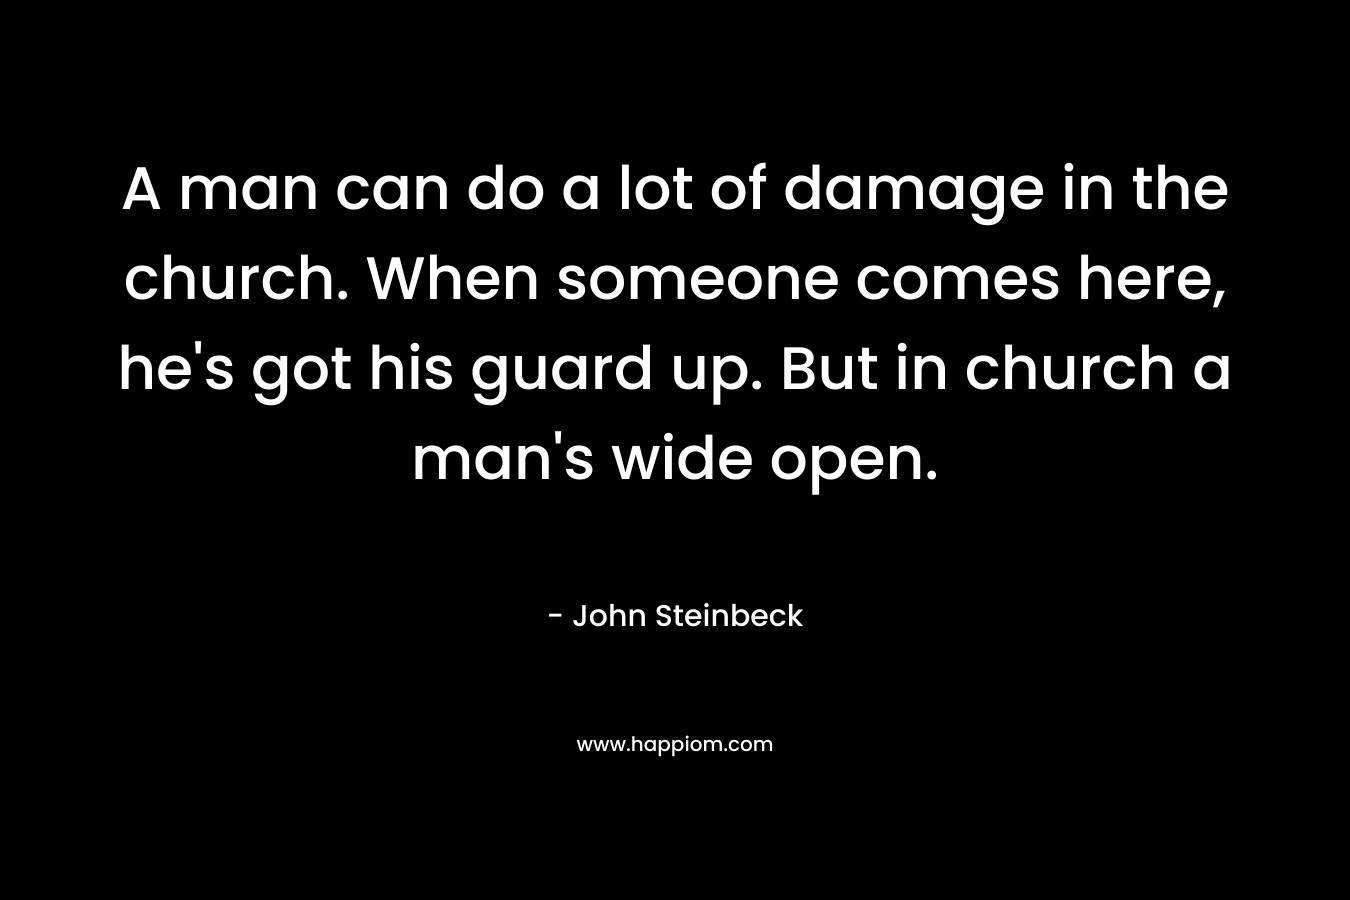 A man can do a lot of damage in the church. When someone comes here, he's got his guard up. But in church a man's wide open.